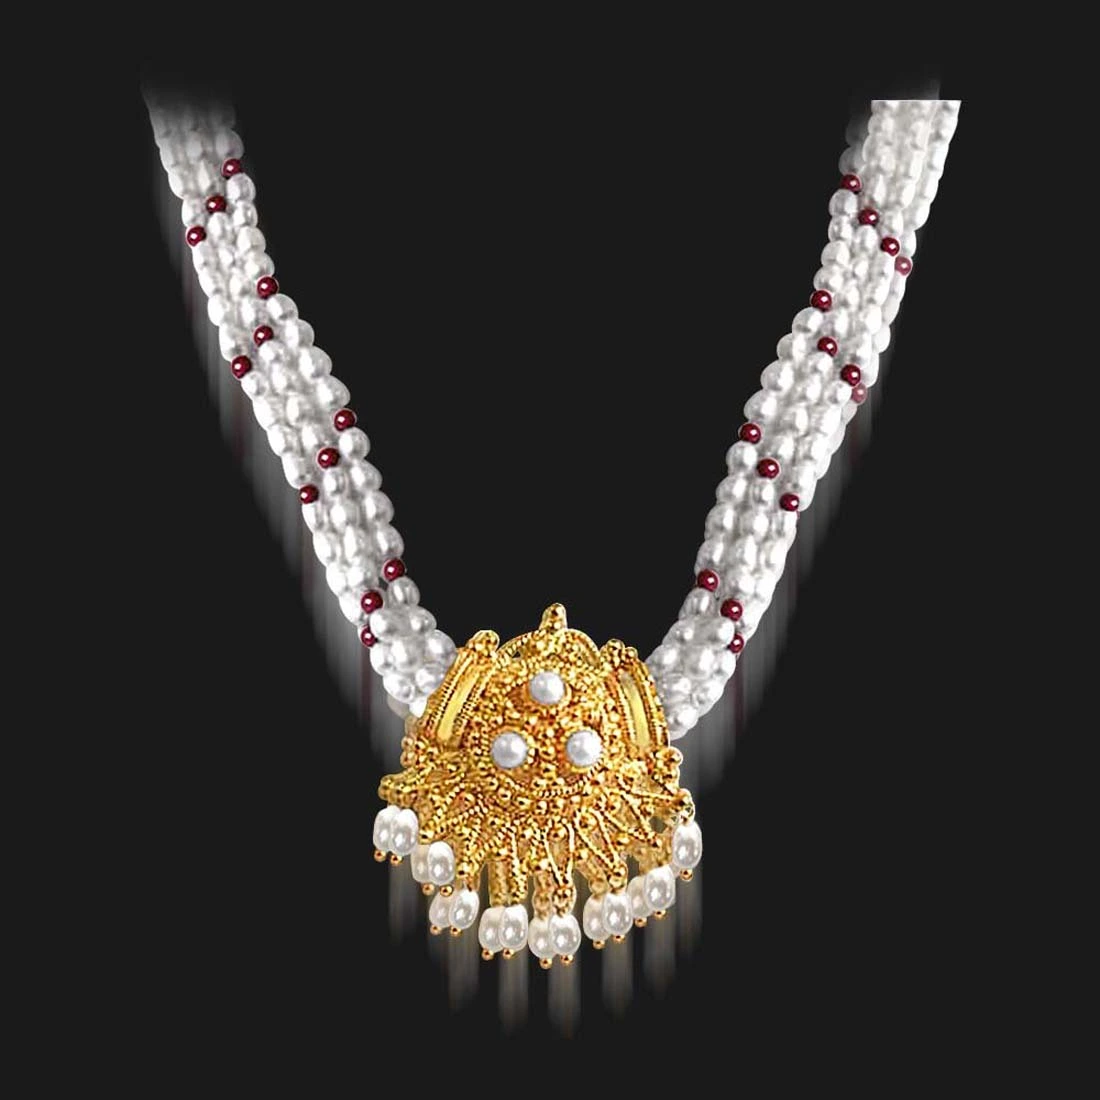 Gold Plated Temple Design Pendant, 3 Line Rice Pearl & Red Garnet Beads Pendant Necklace for Women (SNP9A)